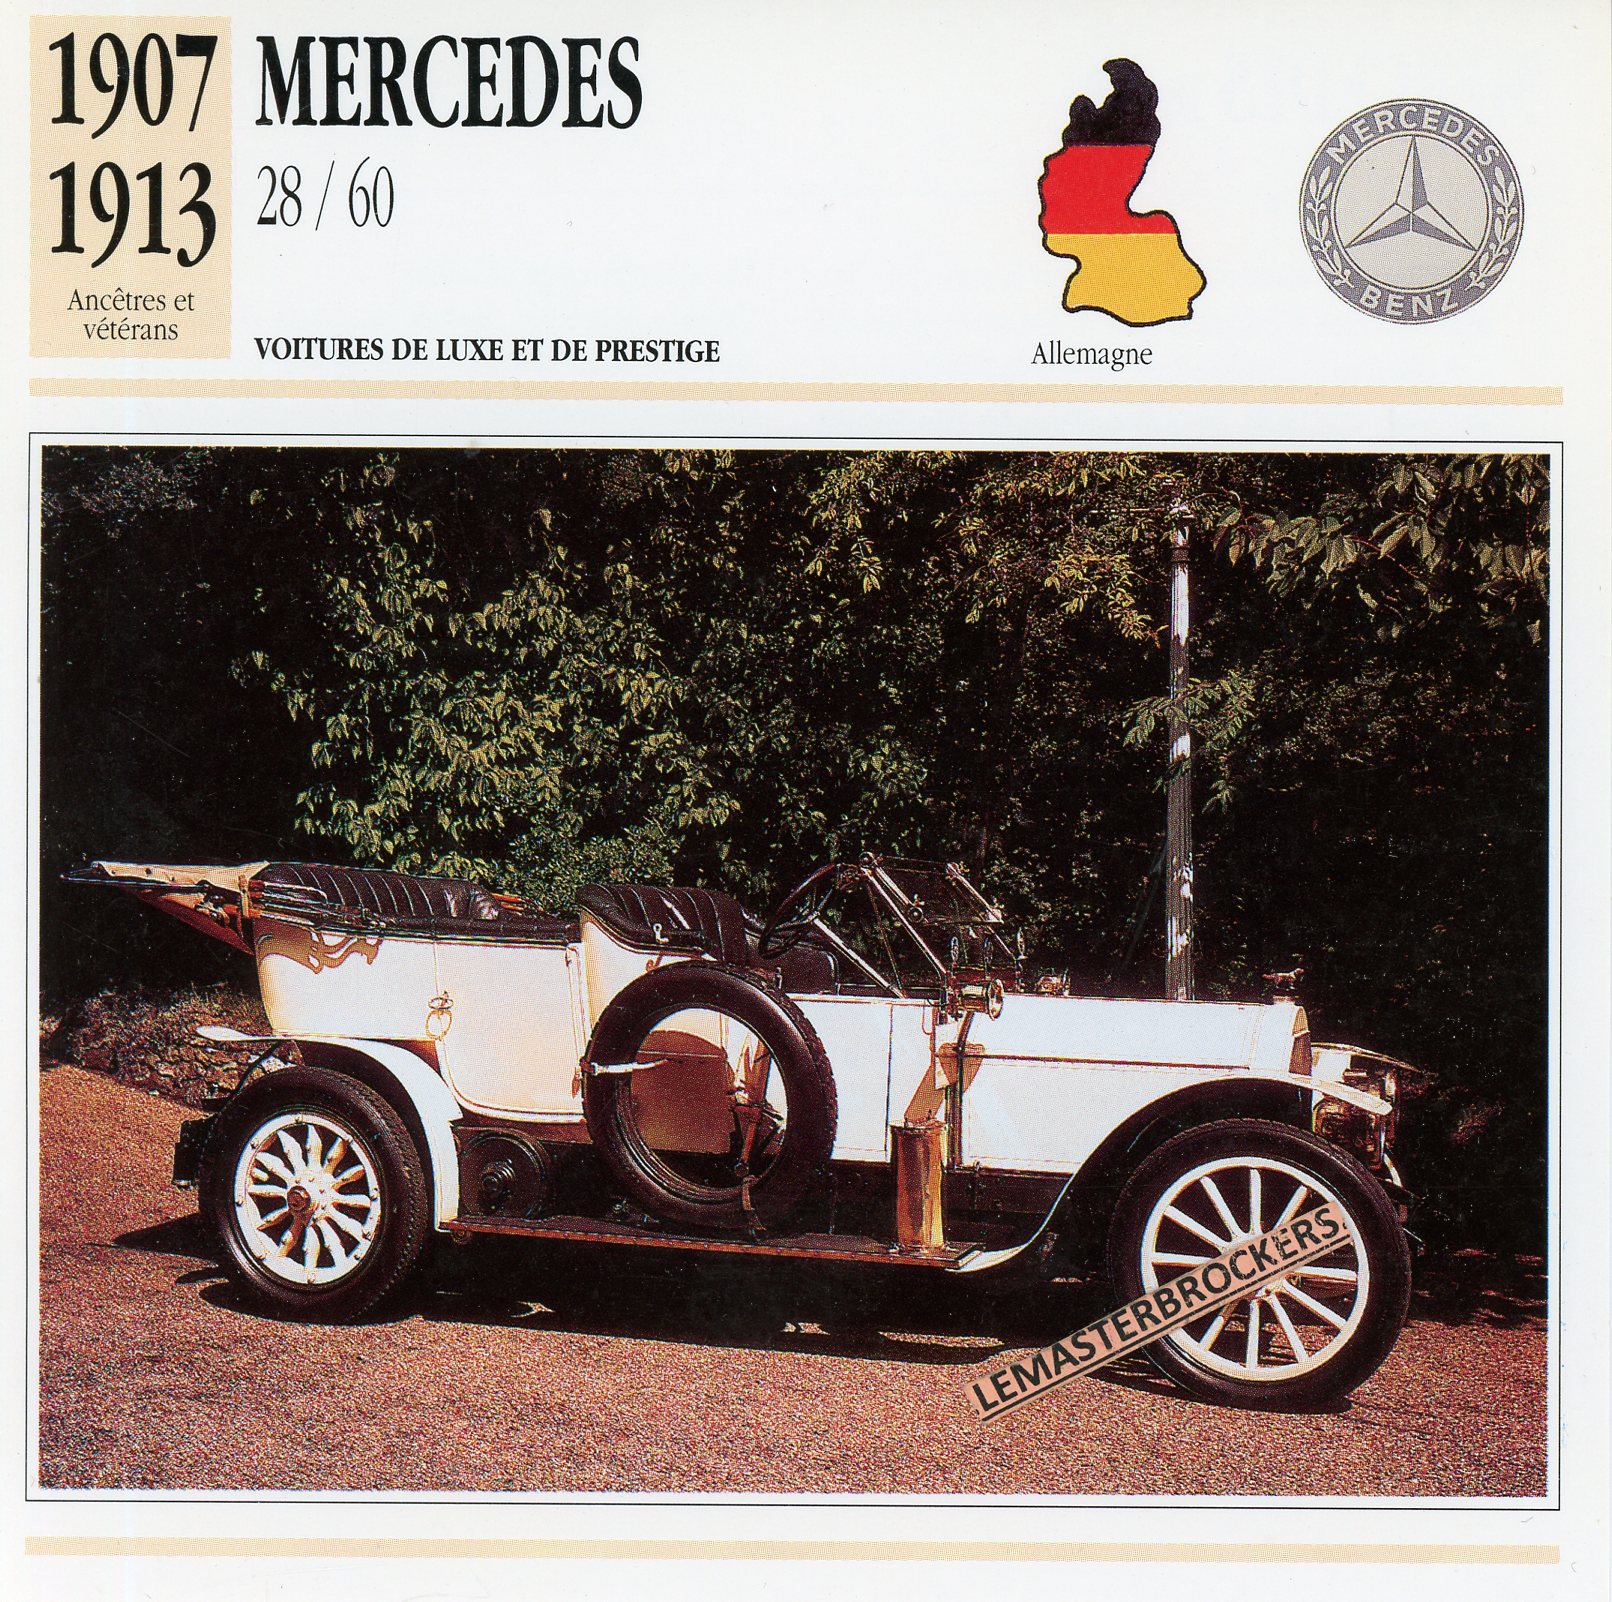 FICHE-AUTO-MERCEDES-28-60-1907-1913-LEMASTERBROCKERS-CARS-CARD